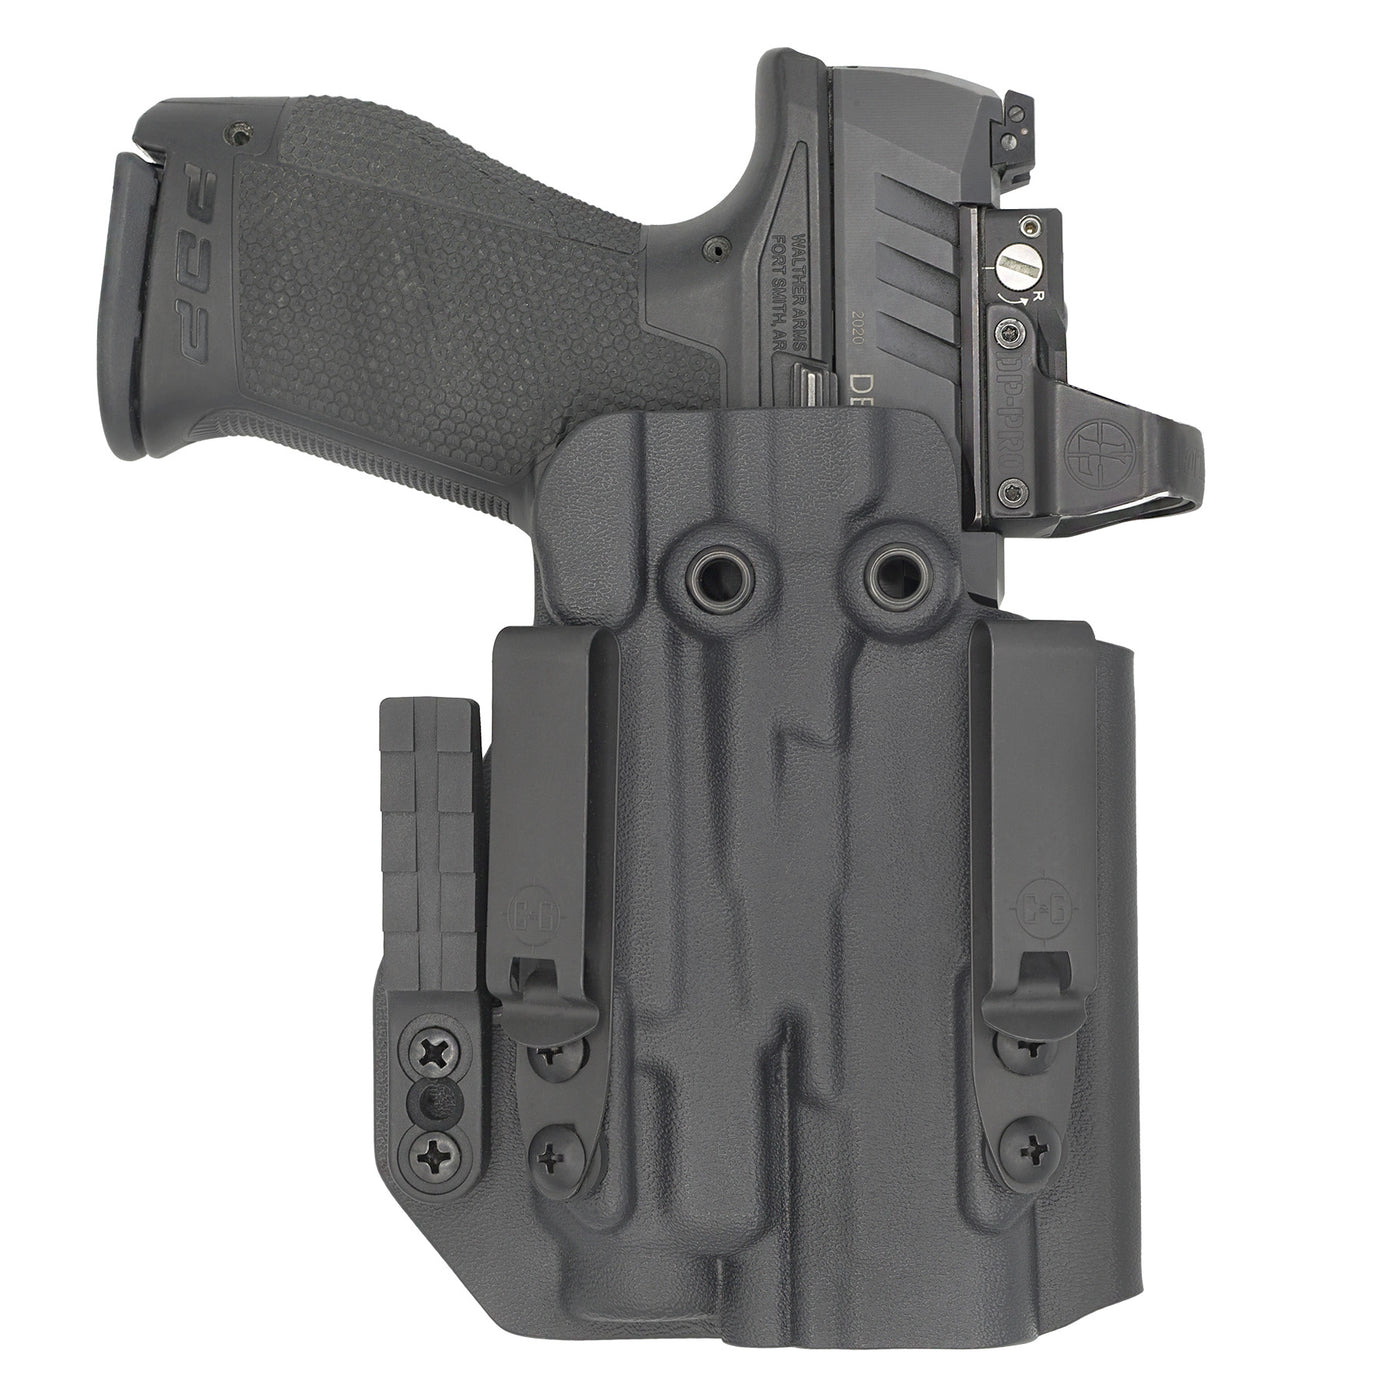 C&G Holsters quickship IWB ALPHA UPGRADE Tactical CZ P07/09 Streamlight TLR7/a in holstered position